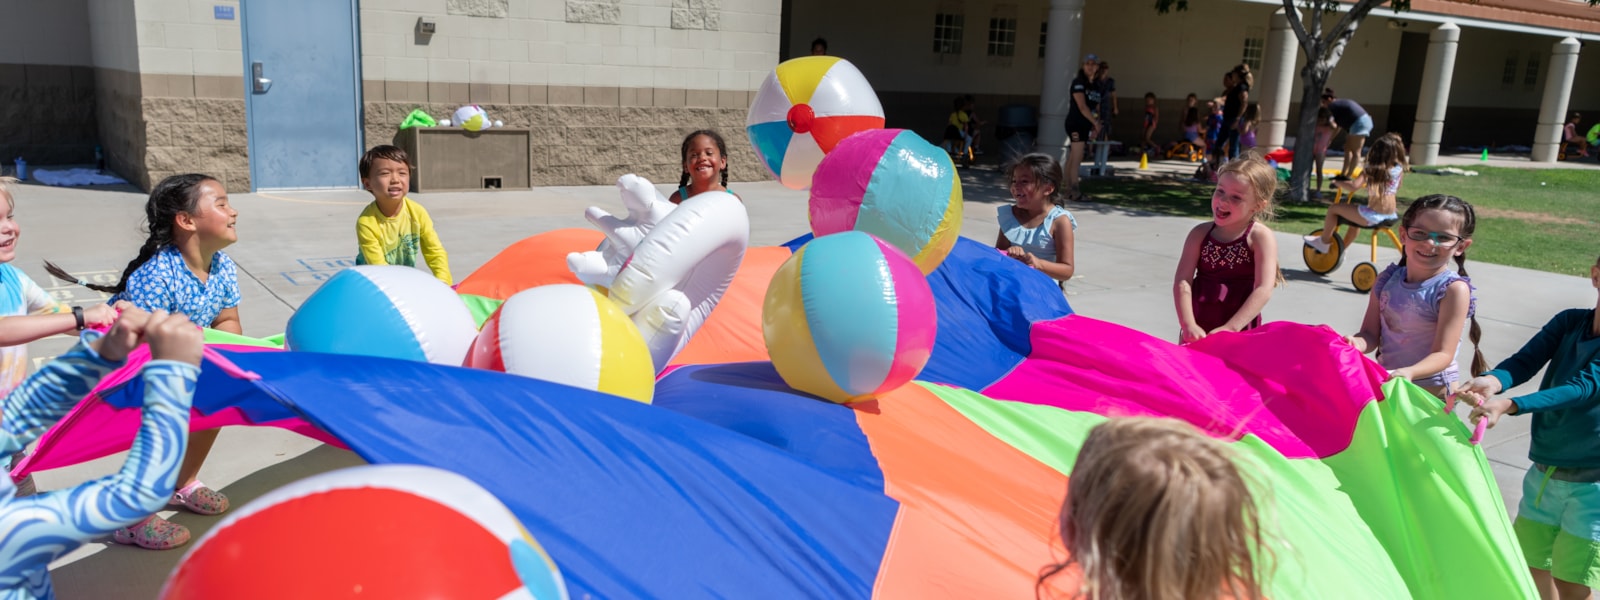 students playing with a parachute and balls